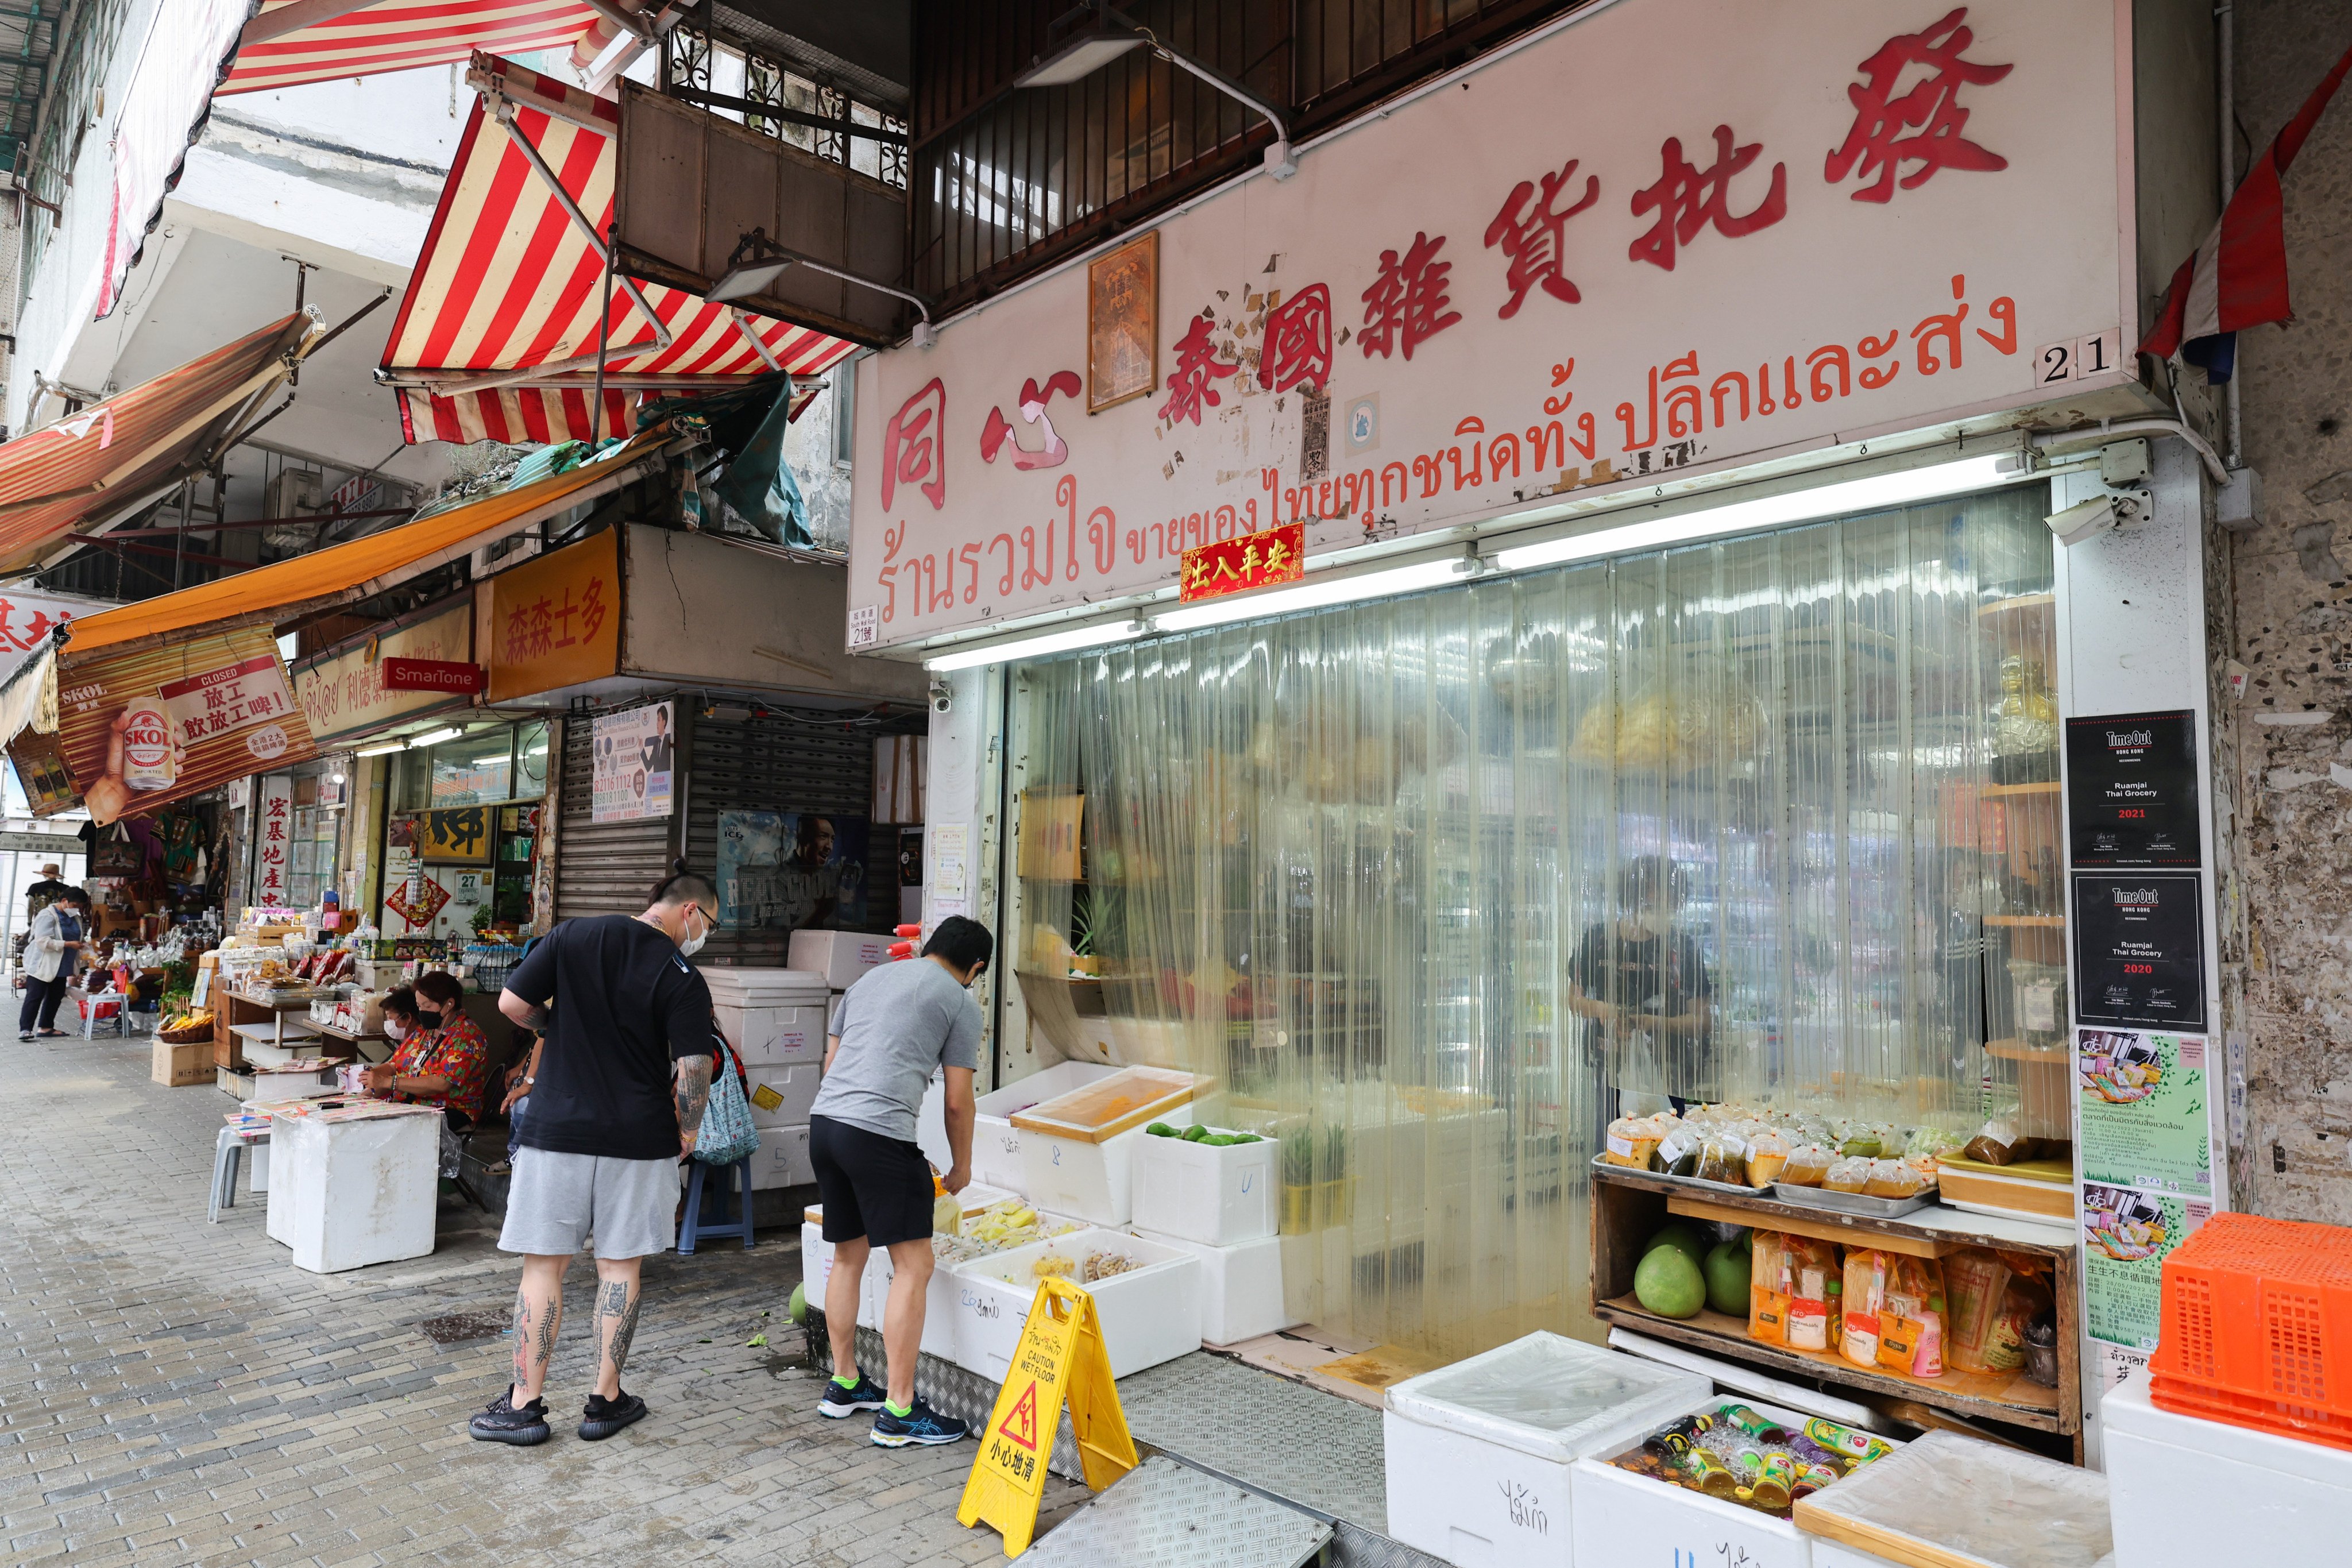 Kowloon City is known as Hong Kong’s “Little Thailand” and is home to dozens of Thai restaurants and grocery stores. Photo: Yik Yeung-man